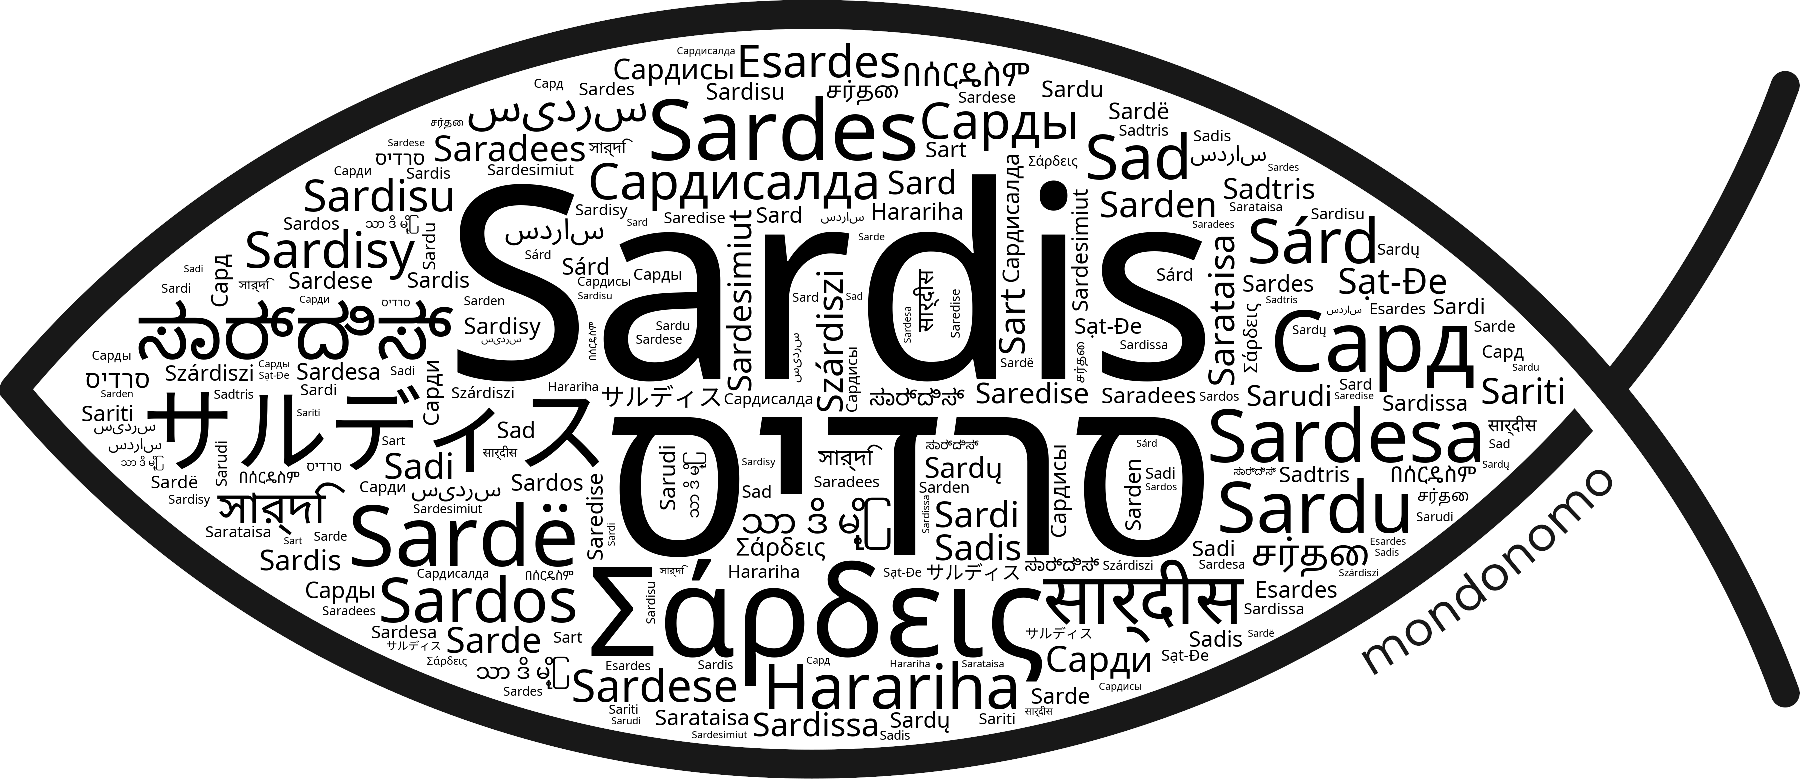 Name Sardis in the world's Bibles